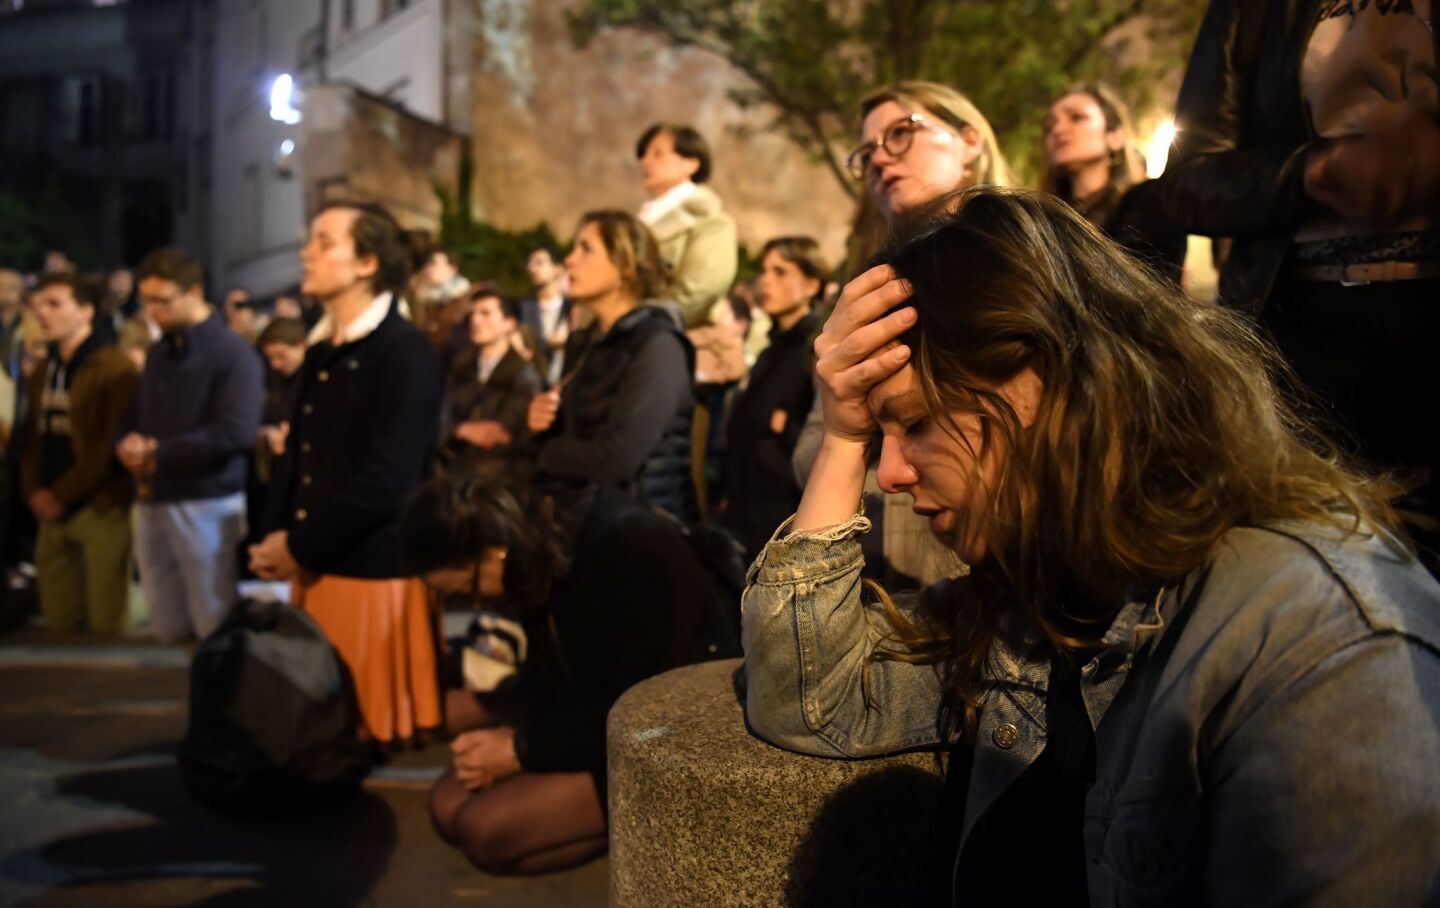 People kneel as they pray outside and watch the Notre Dame fire. A ferocious and fast-moving blaze, which broke out about 6:45 p.m., destroyed large parts of the 850-year-old Gothic monument in Paris.